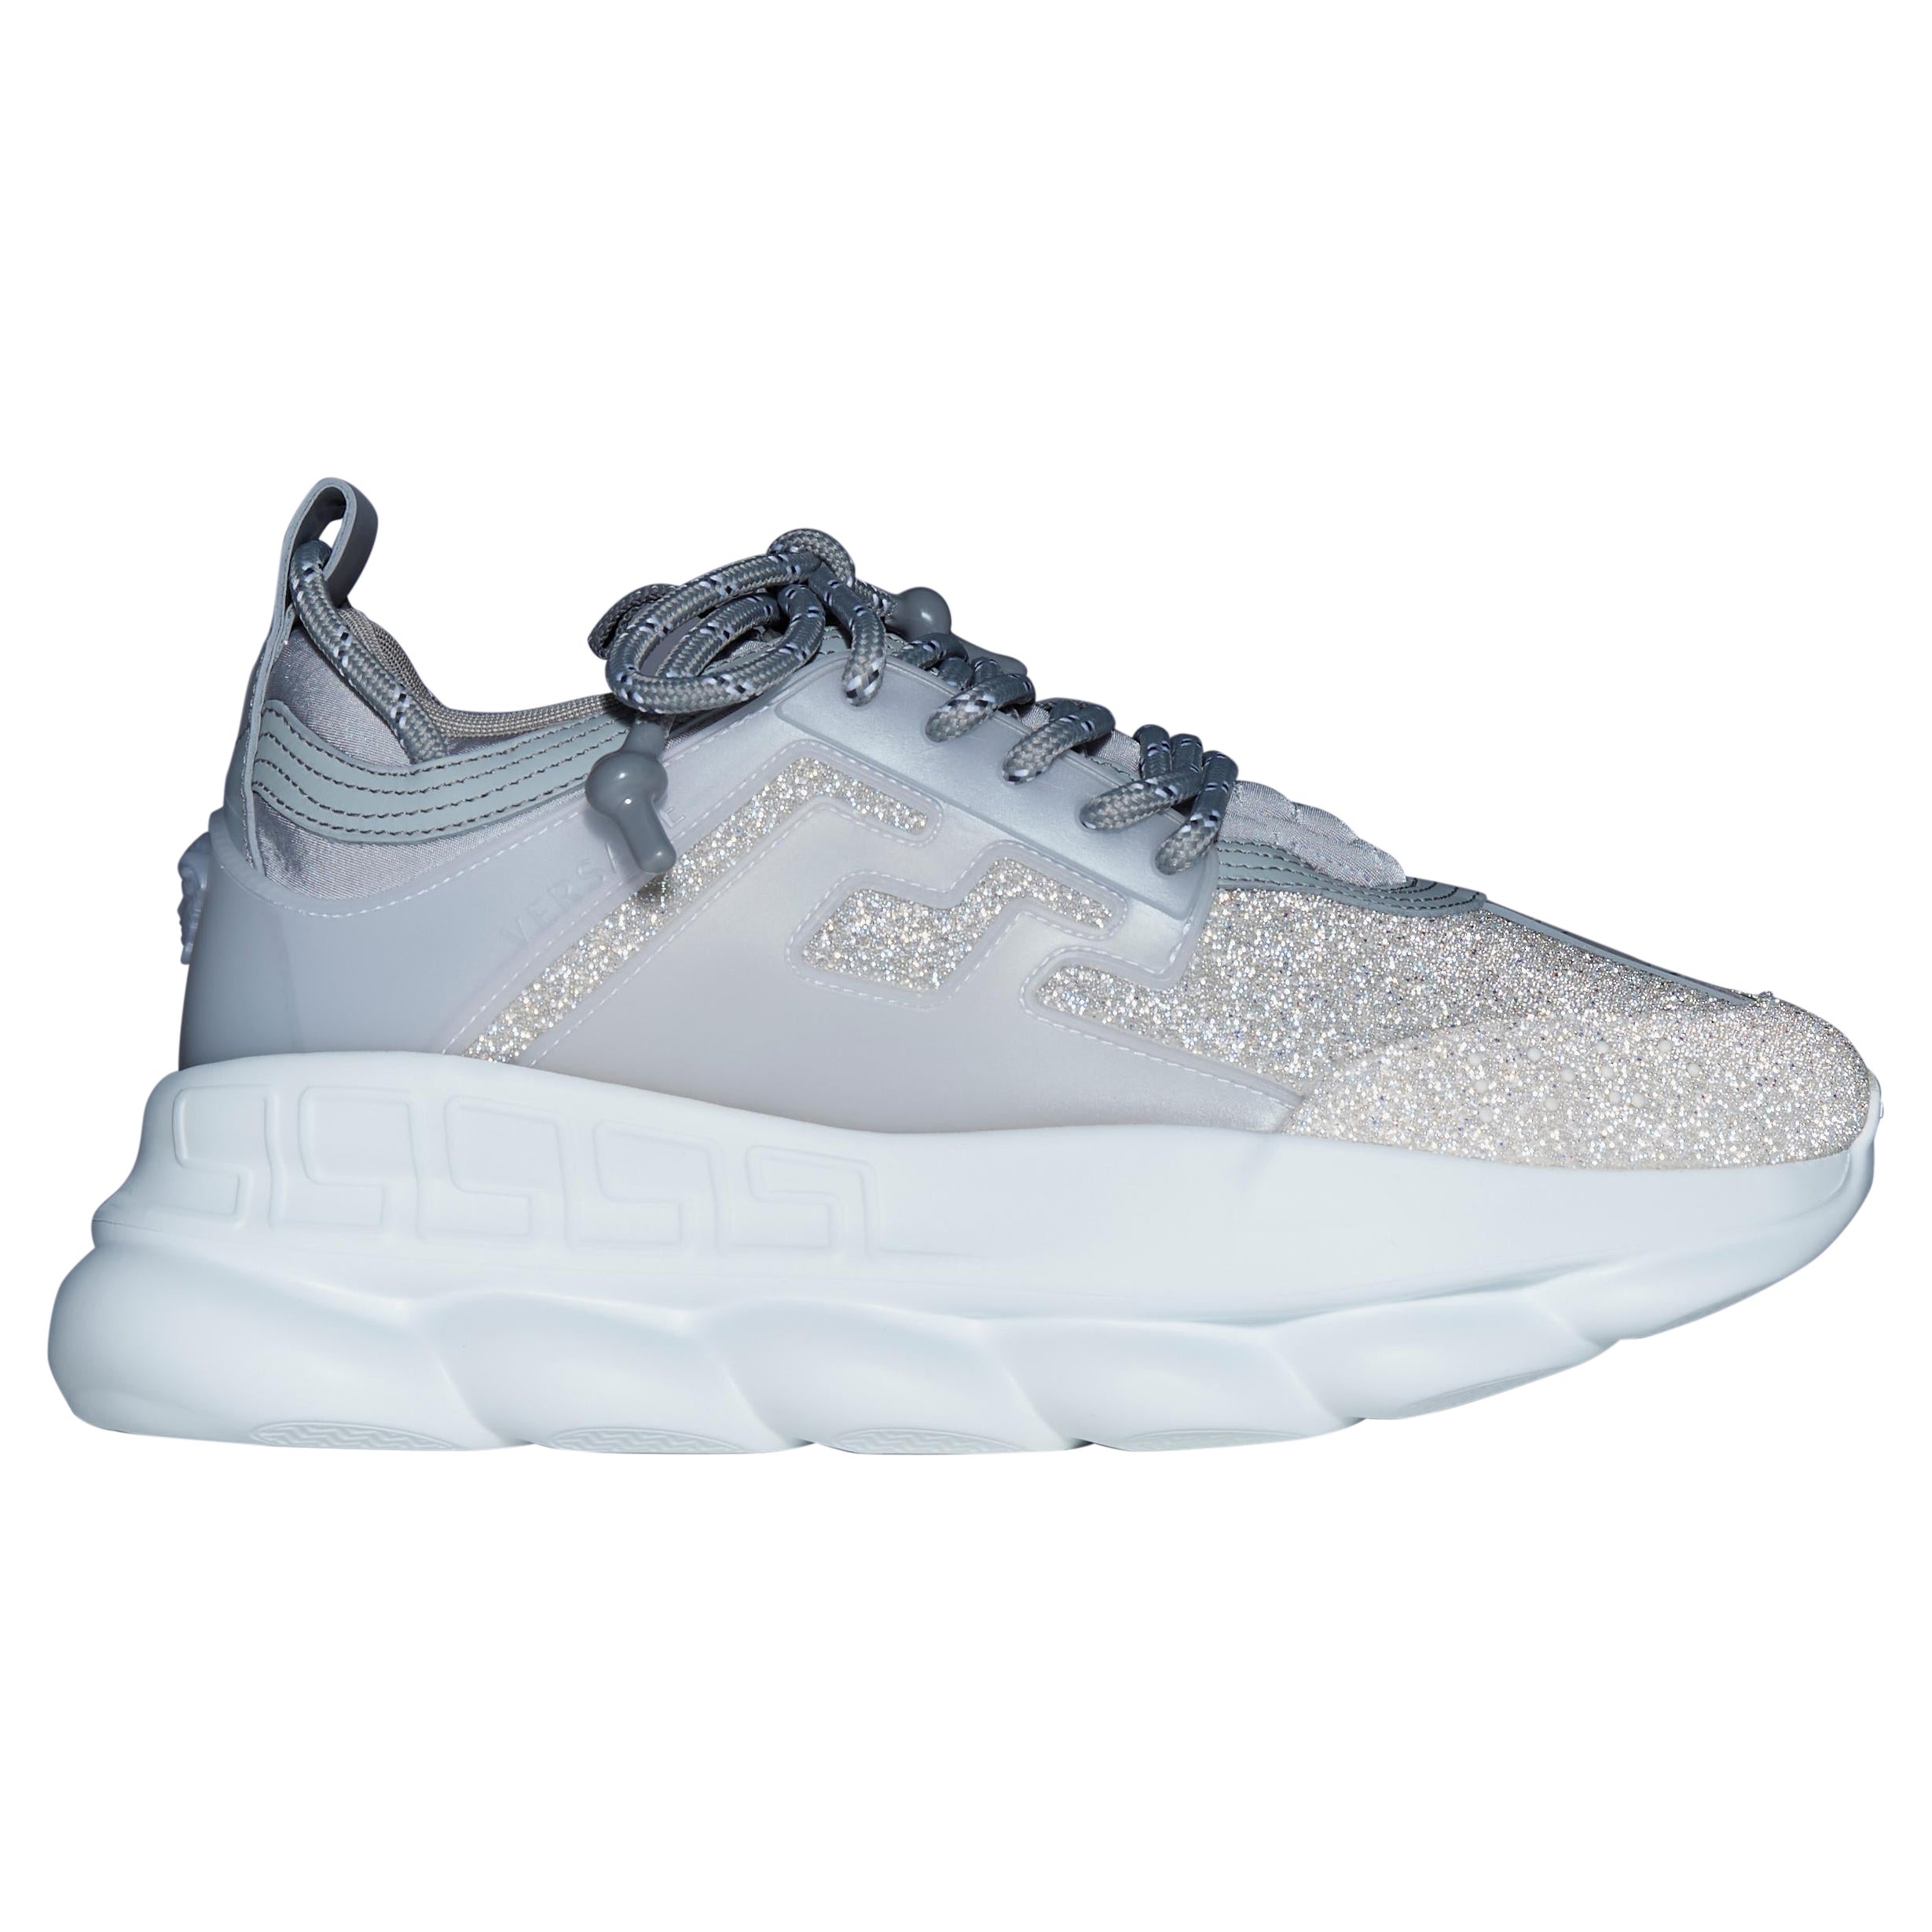 new VERSACE Chain Reaction Reflective Silver Crystal Rhinestone sneaker EU40 US7 For Sale